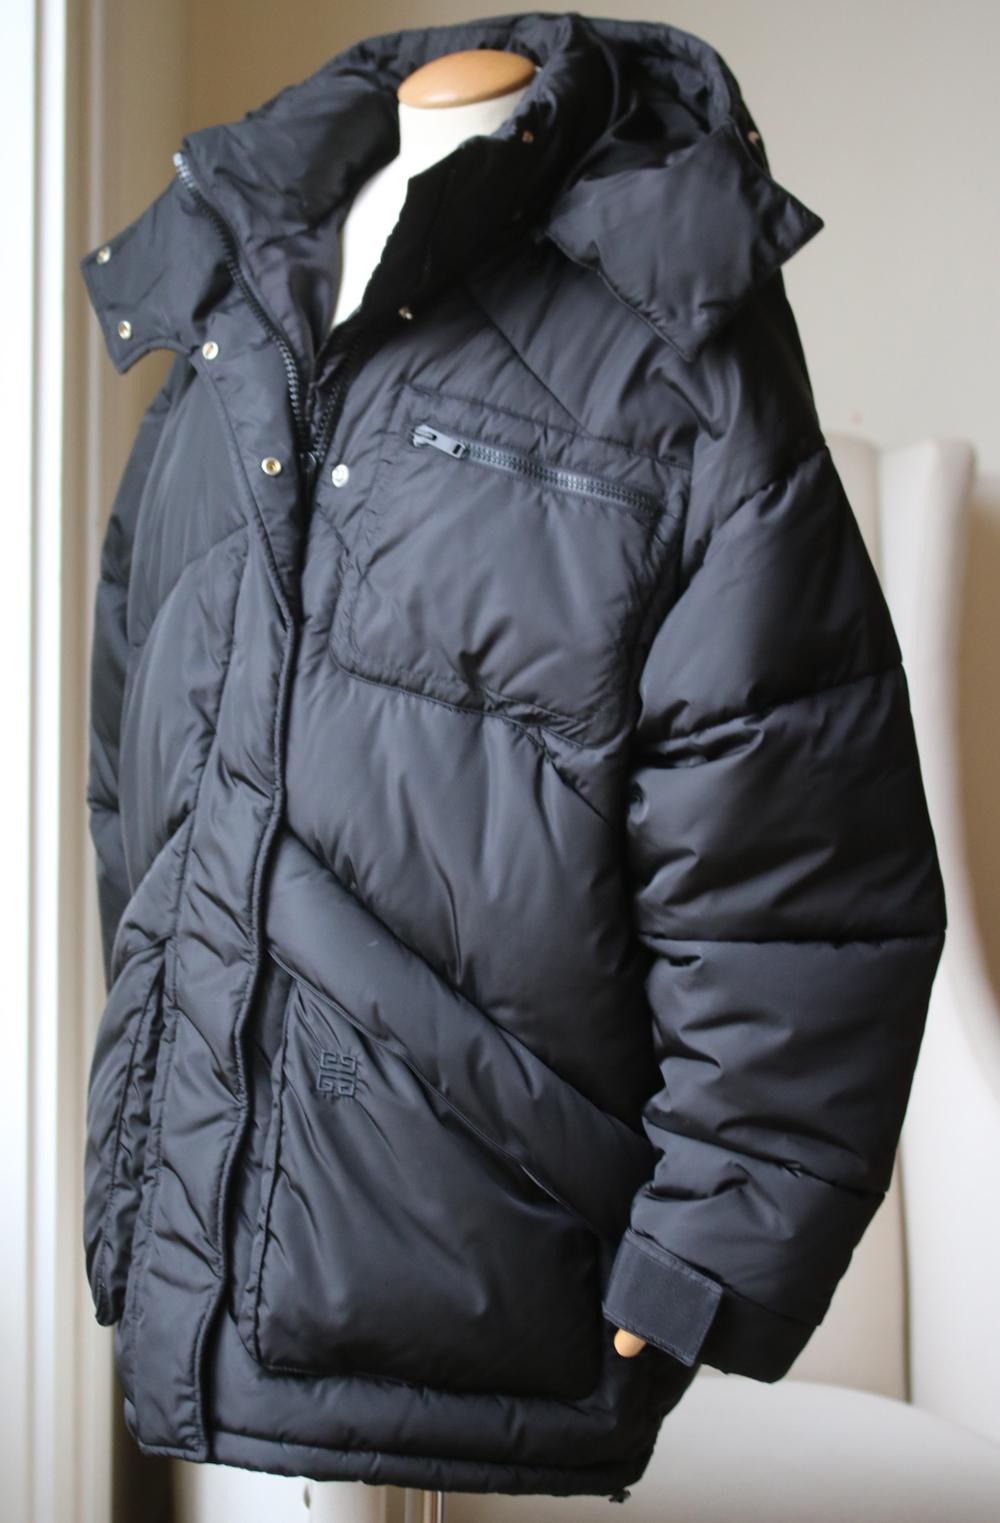 moncler x givenchy puffer jacket